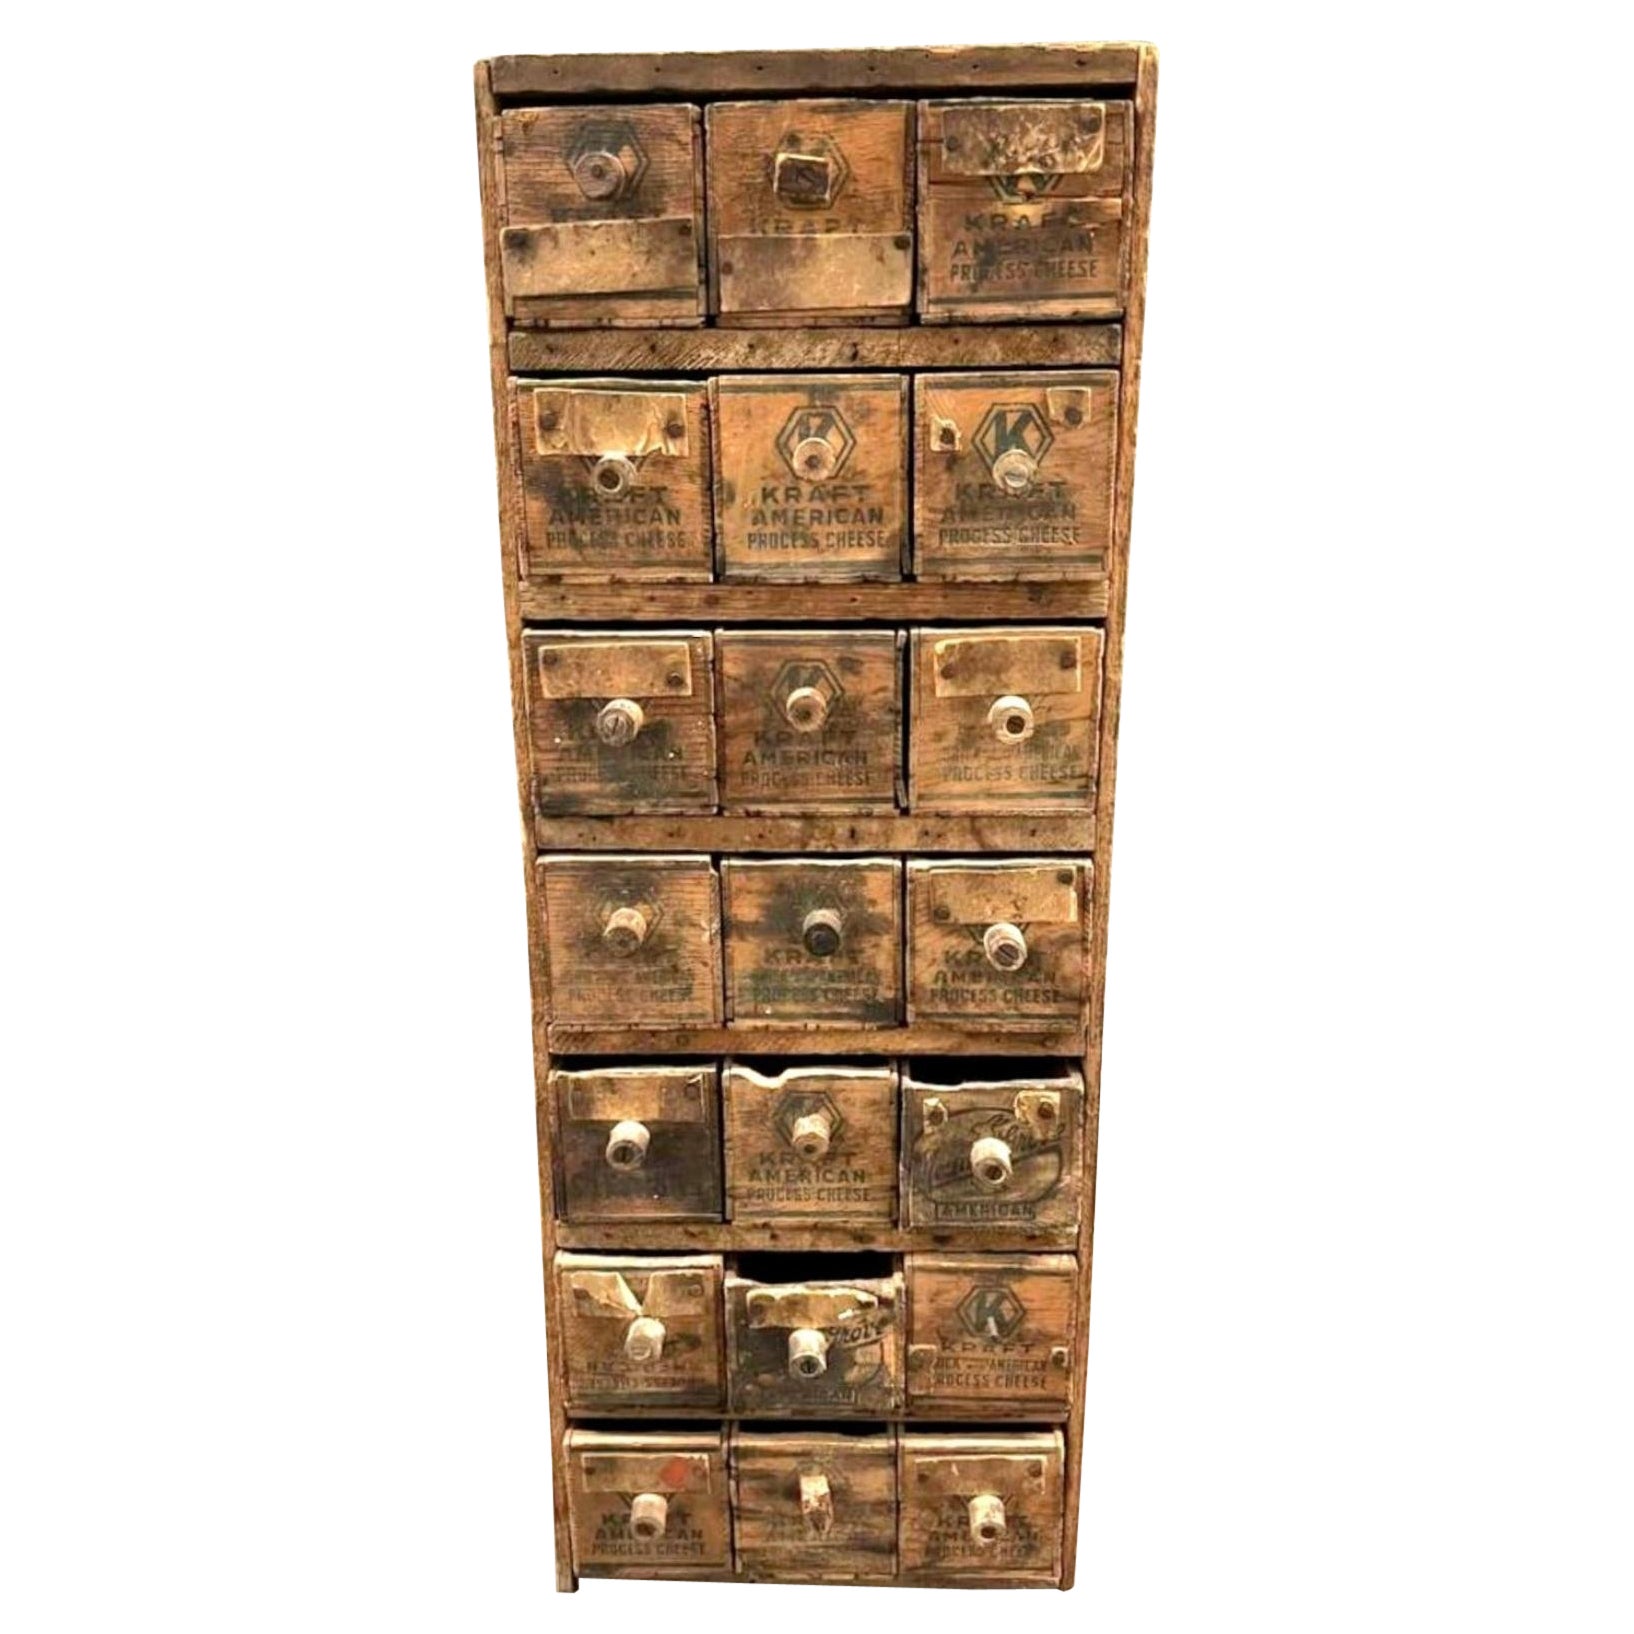 Case Pieces and Storage Cabinets at Auction